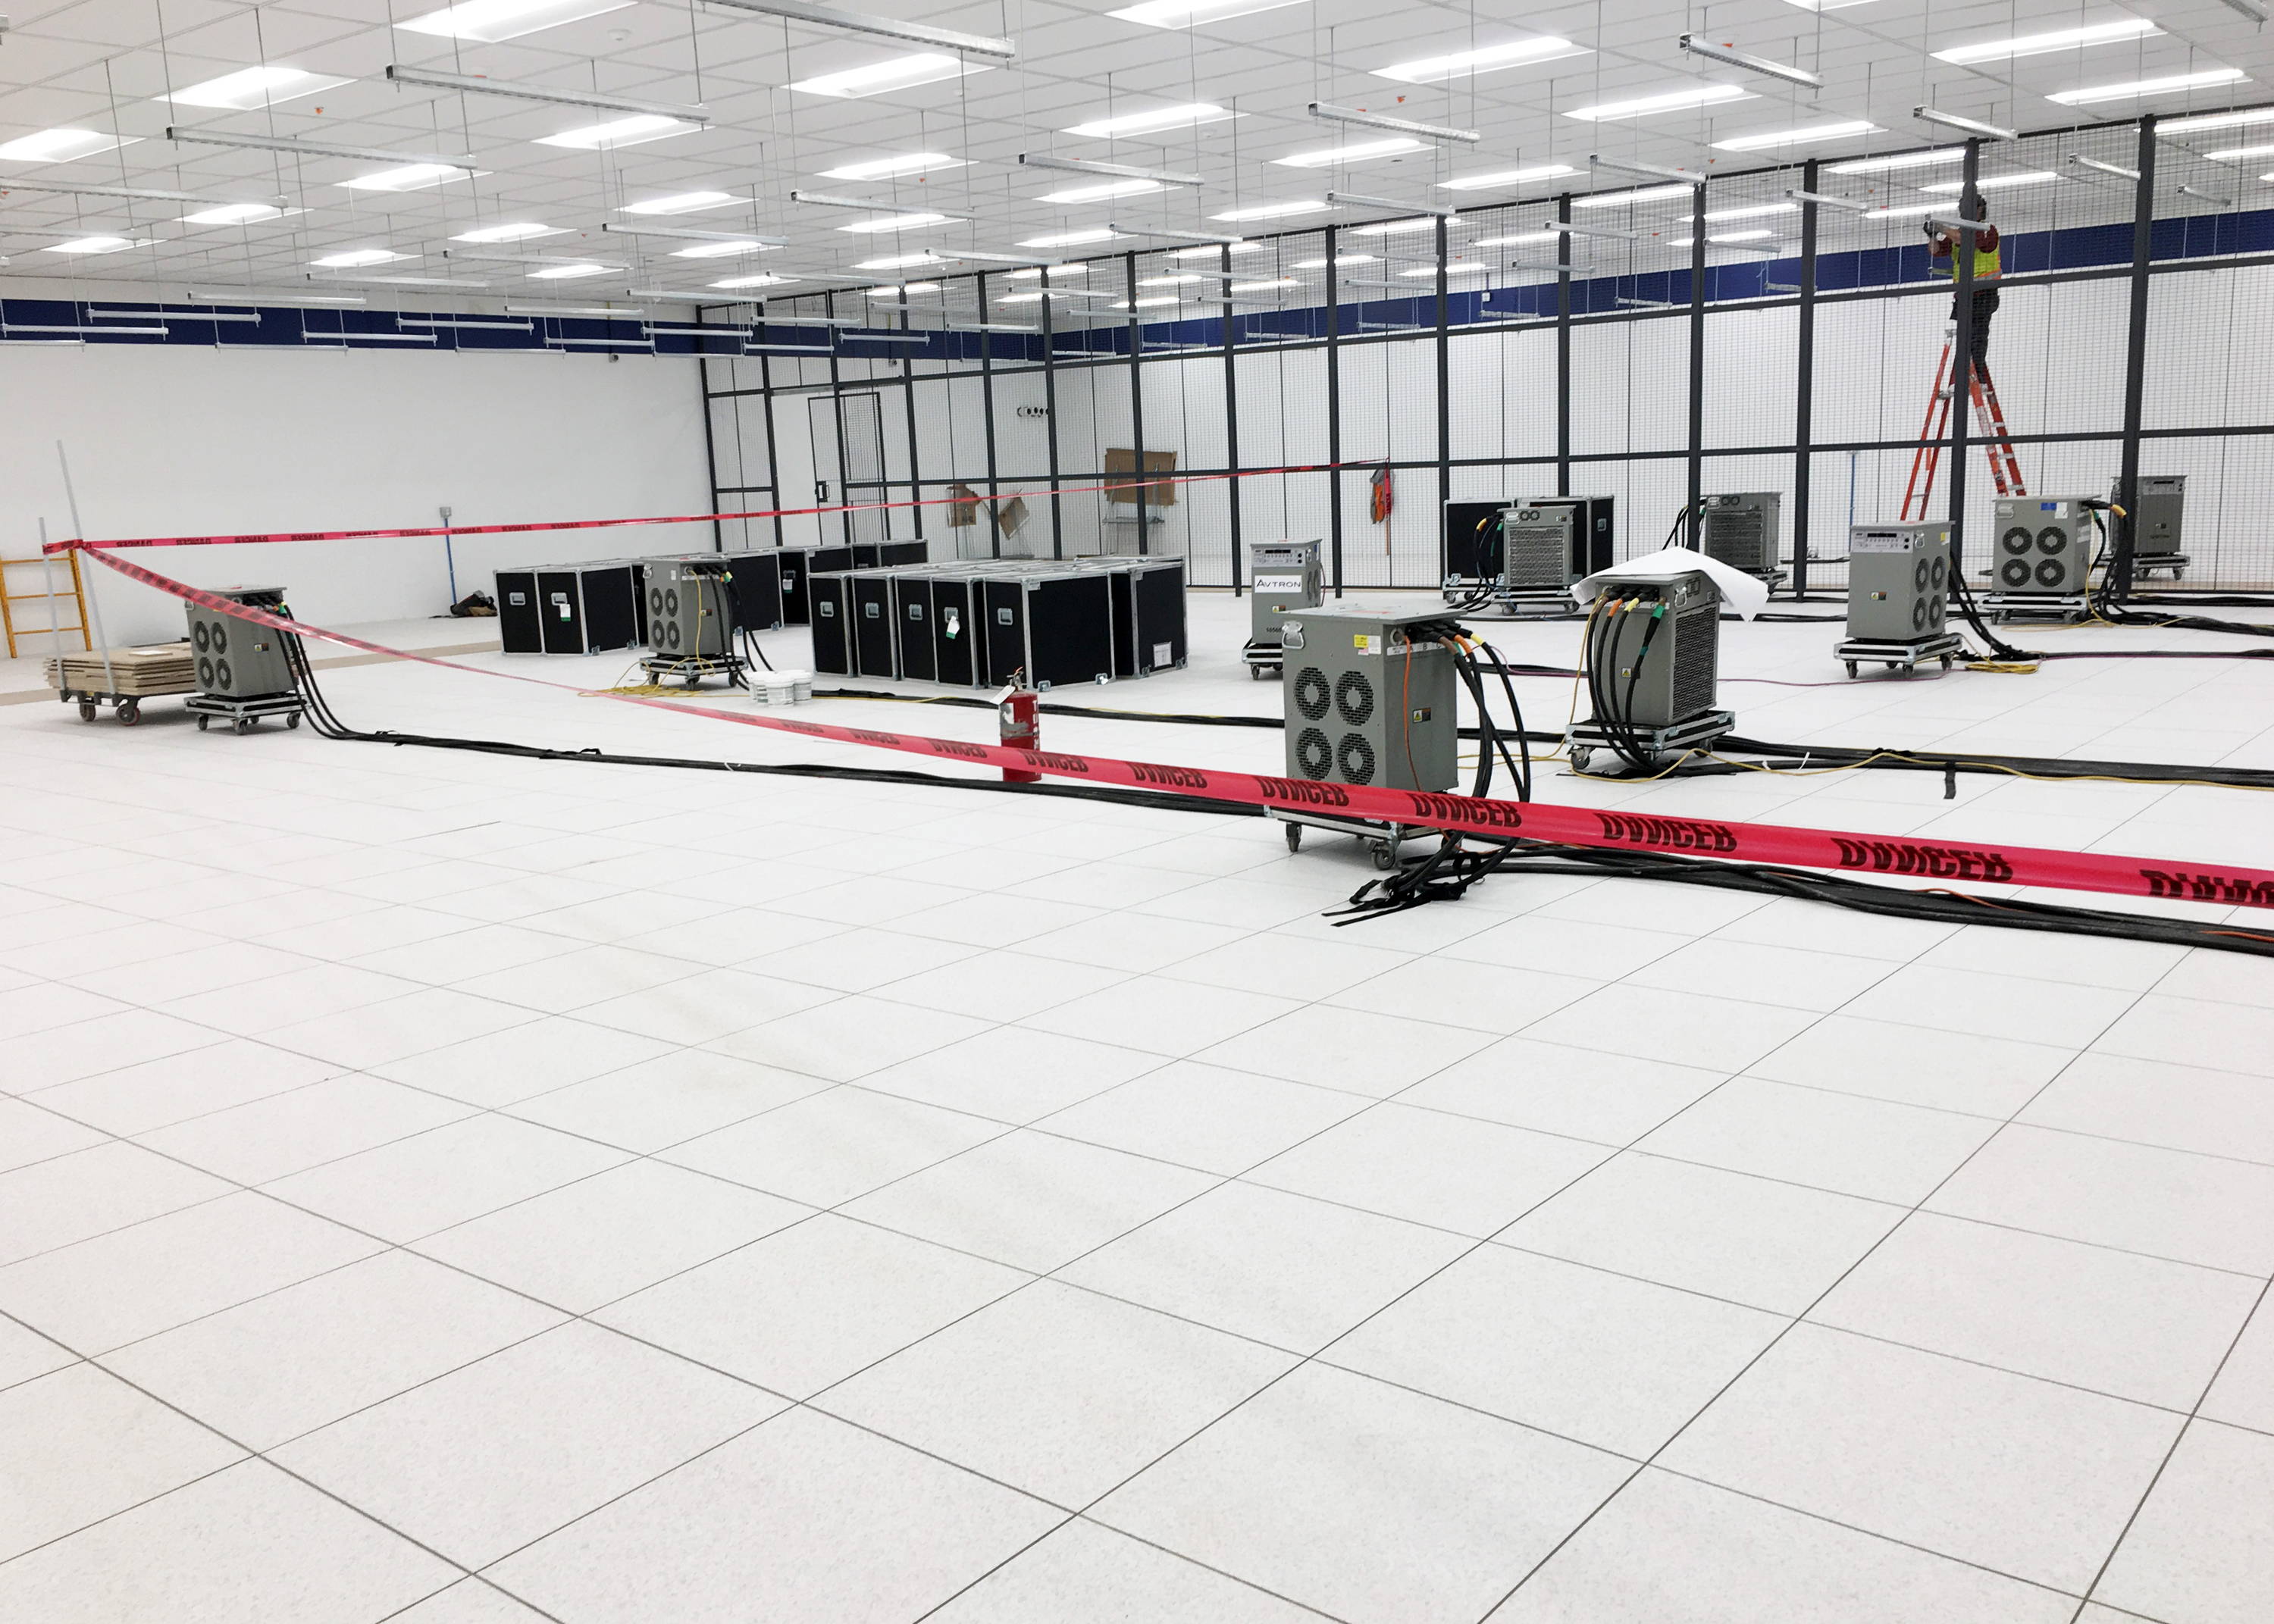 Tate Access Floor installations in Data Centers provide underfloor service distribution space, which keeps the room’s interior clean and neat for proper air migration through equipment.